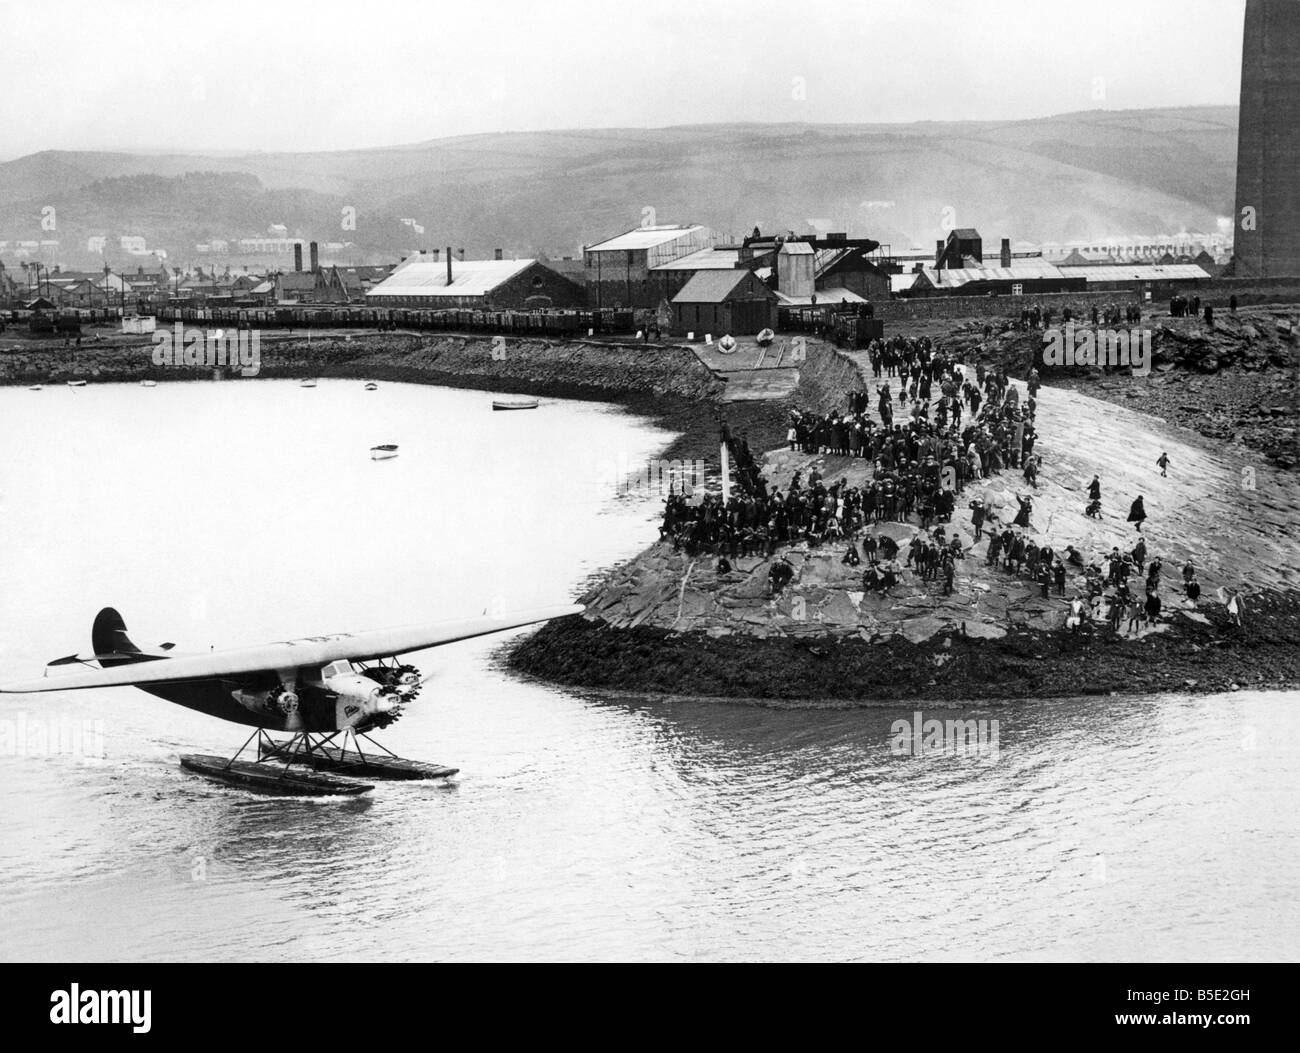 On 18 June Amelia Earhart became the first woman to fly across the North Atlantic when she arrived at Burry Point near Llanelli, Carmarthenshire at 12.40pm after 20 hour, 40 minute flight. Commander Wilmer Stultz, accompanied by engineer Lon Gordon, flew the Fokker F-VIIA-3m, named Friendship, with Amelia, an experienced pilot, navigating for much of the way. They left Trepassay Harbor in Newfoundland at 3.50pm on 17 June and experienced a difficult crossing with rain, dense cloud and severe turbulence Stock Photo